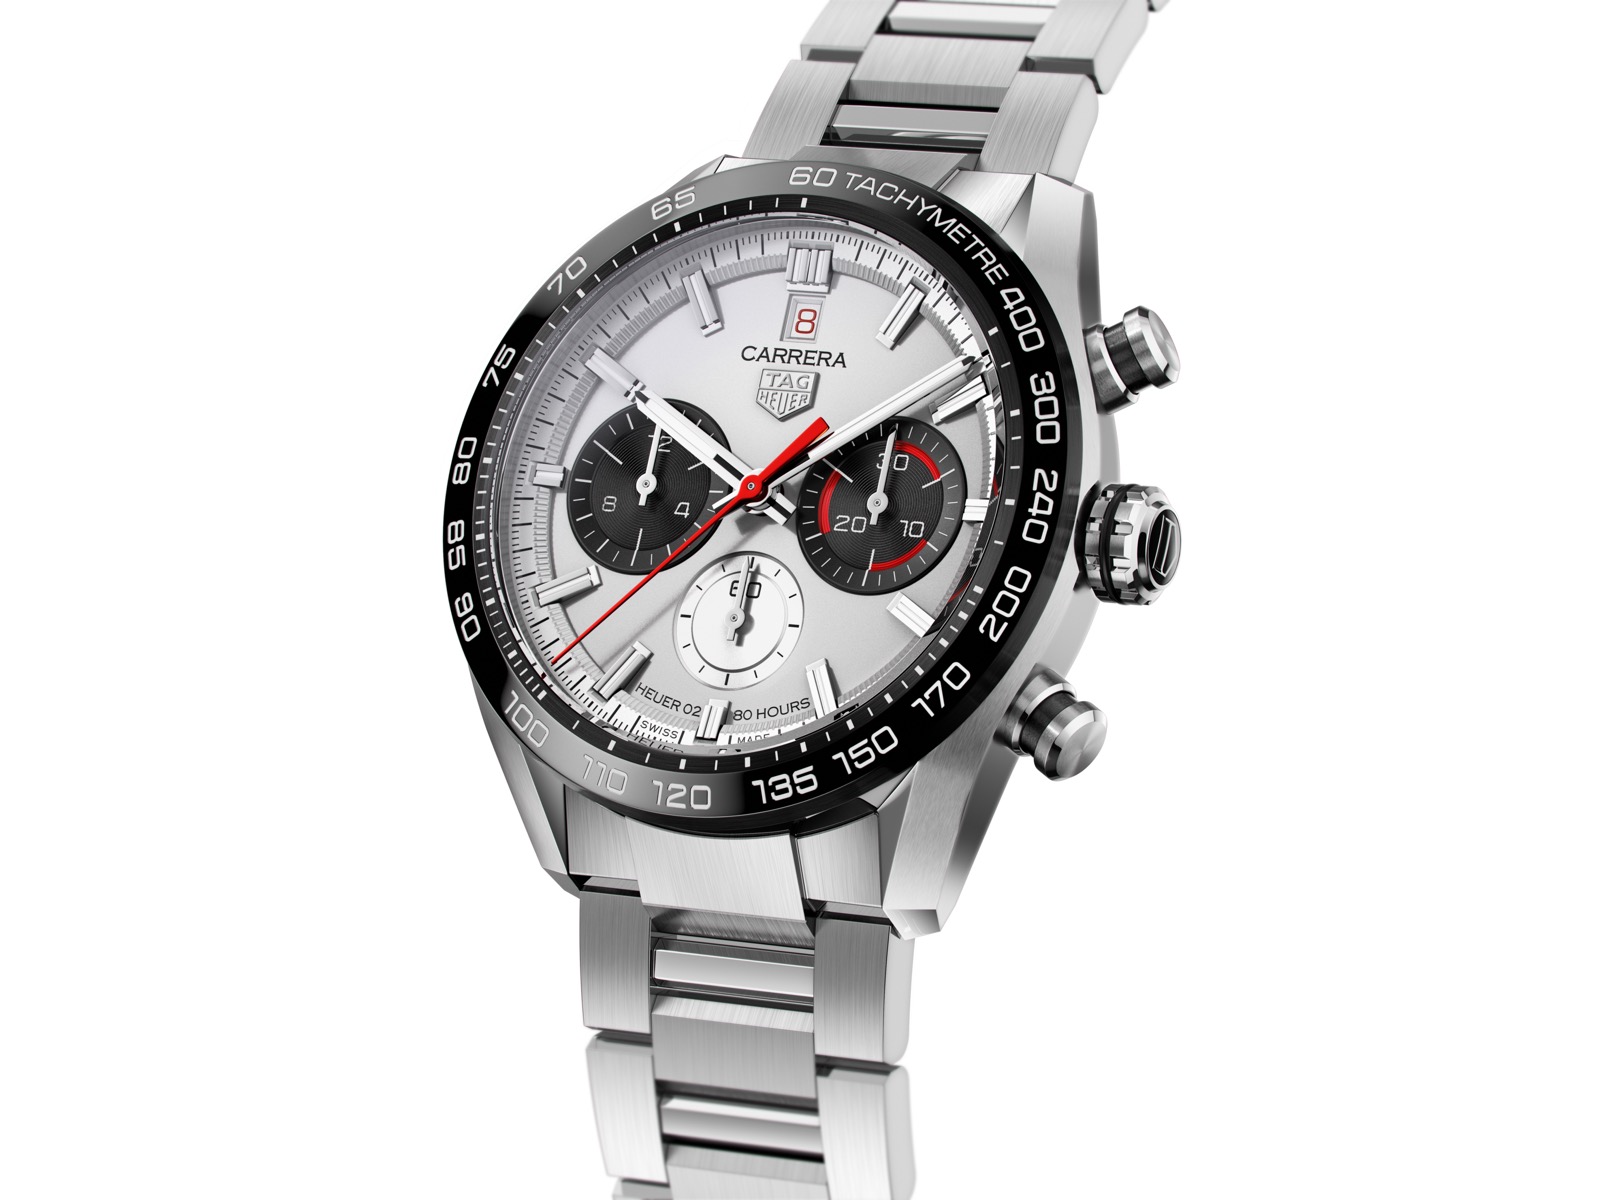 TAG Heuer Carrera Sport Chronograph 160 Years Special Edition